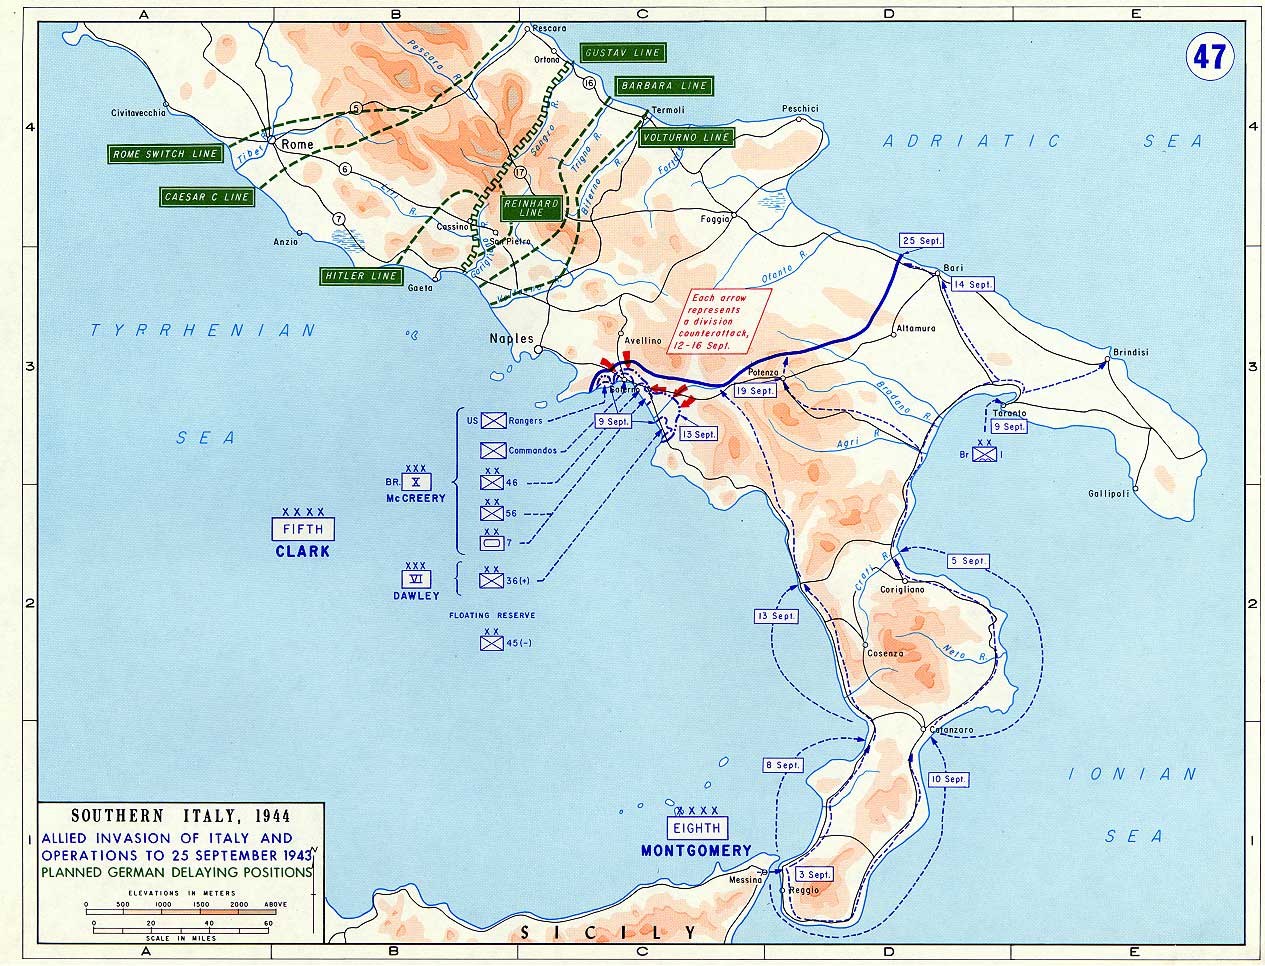 <p>Le varie linee di difesa tedesche tra il gennaio e il giugno 1944.</p><p class='eng'>Southern Italy, 1944. Allied invasion of Italy and operations to 25 semptember 1943. Planned german delaying positions.</p>